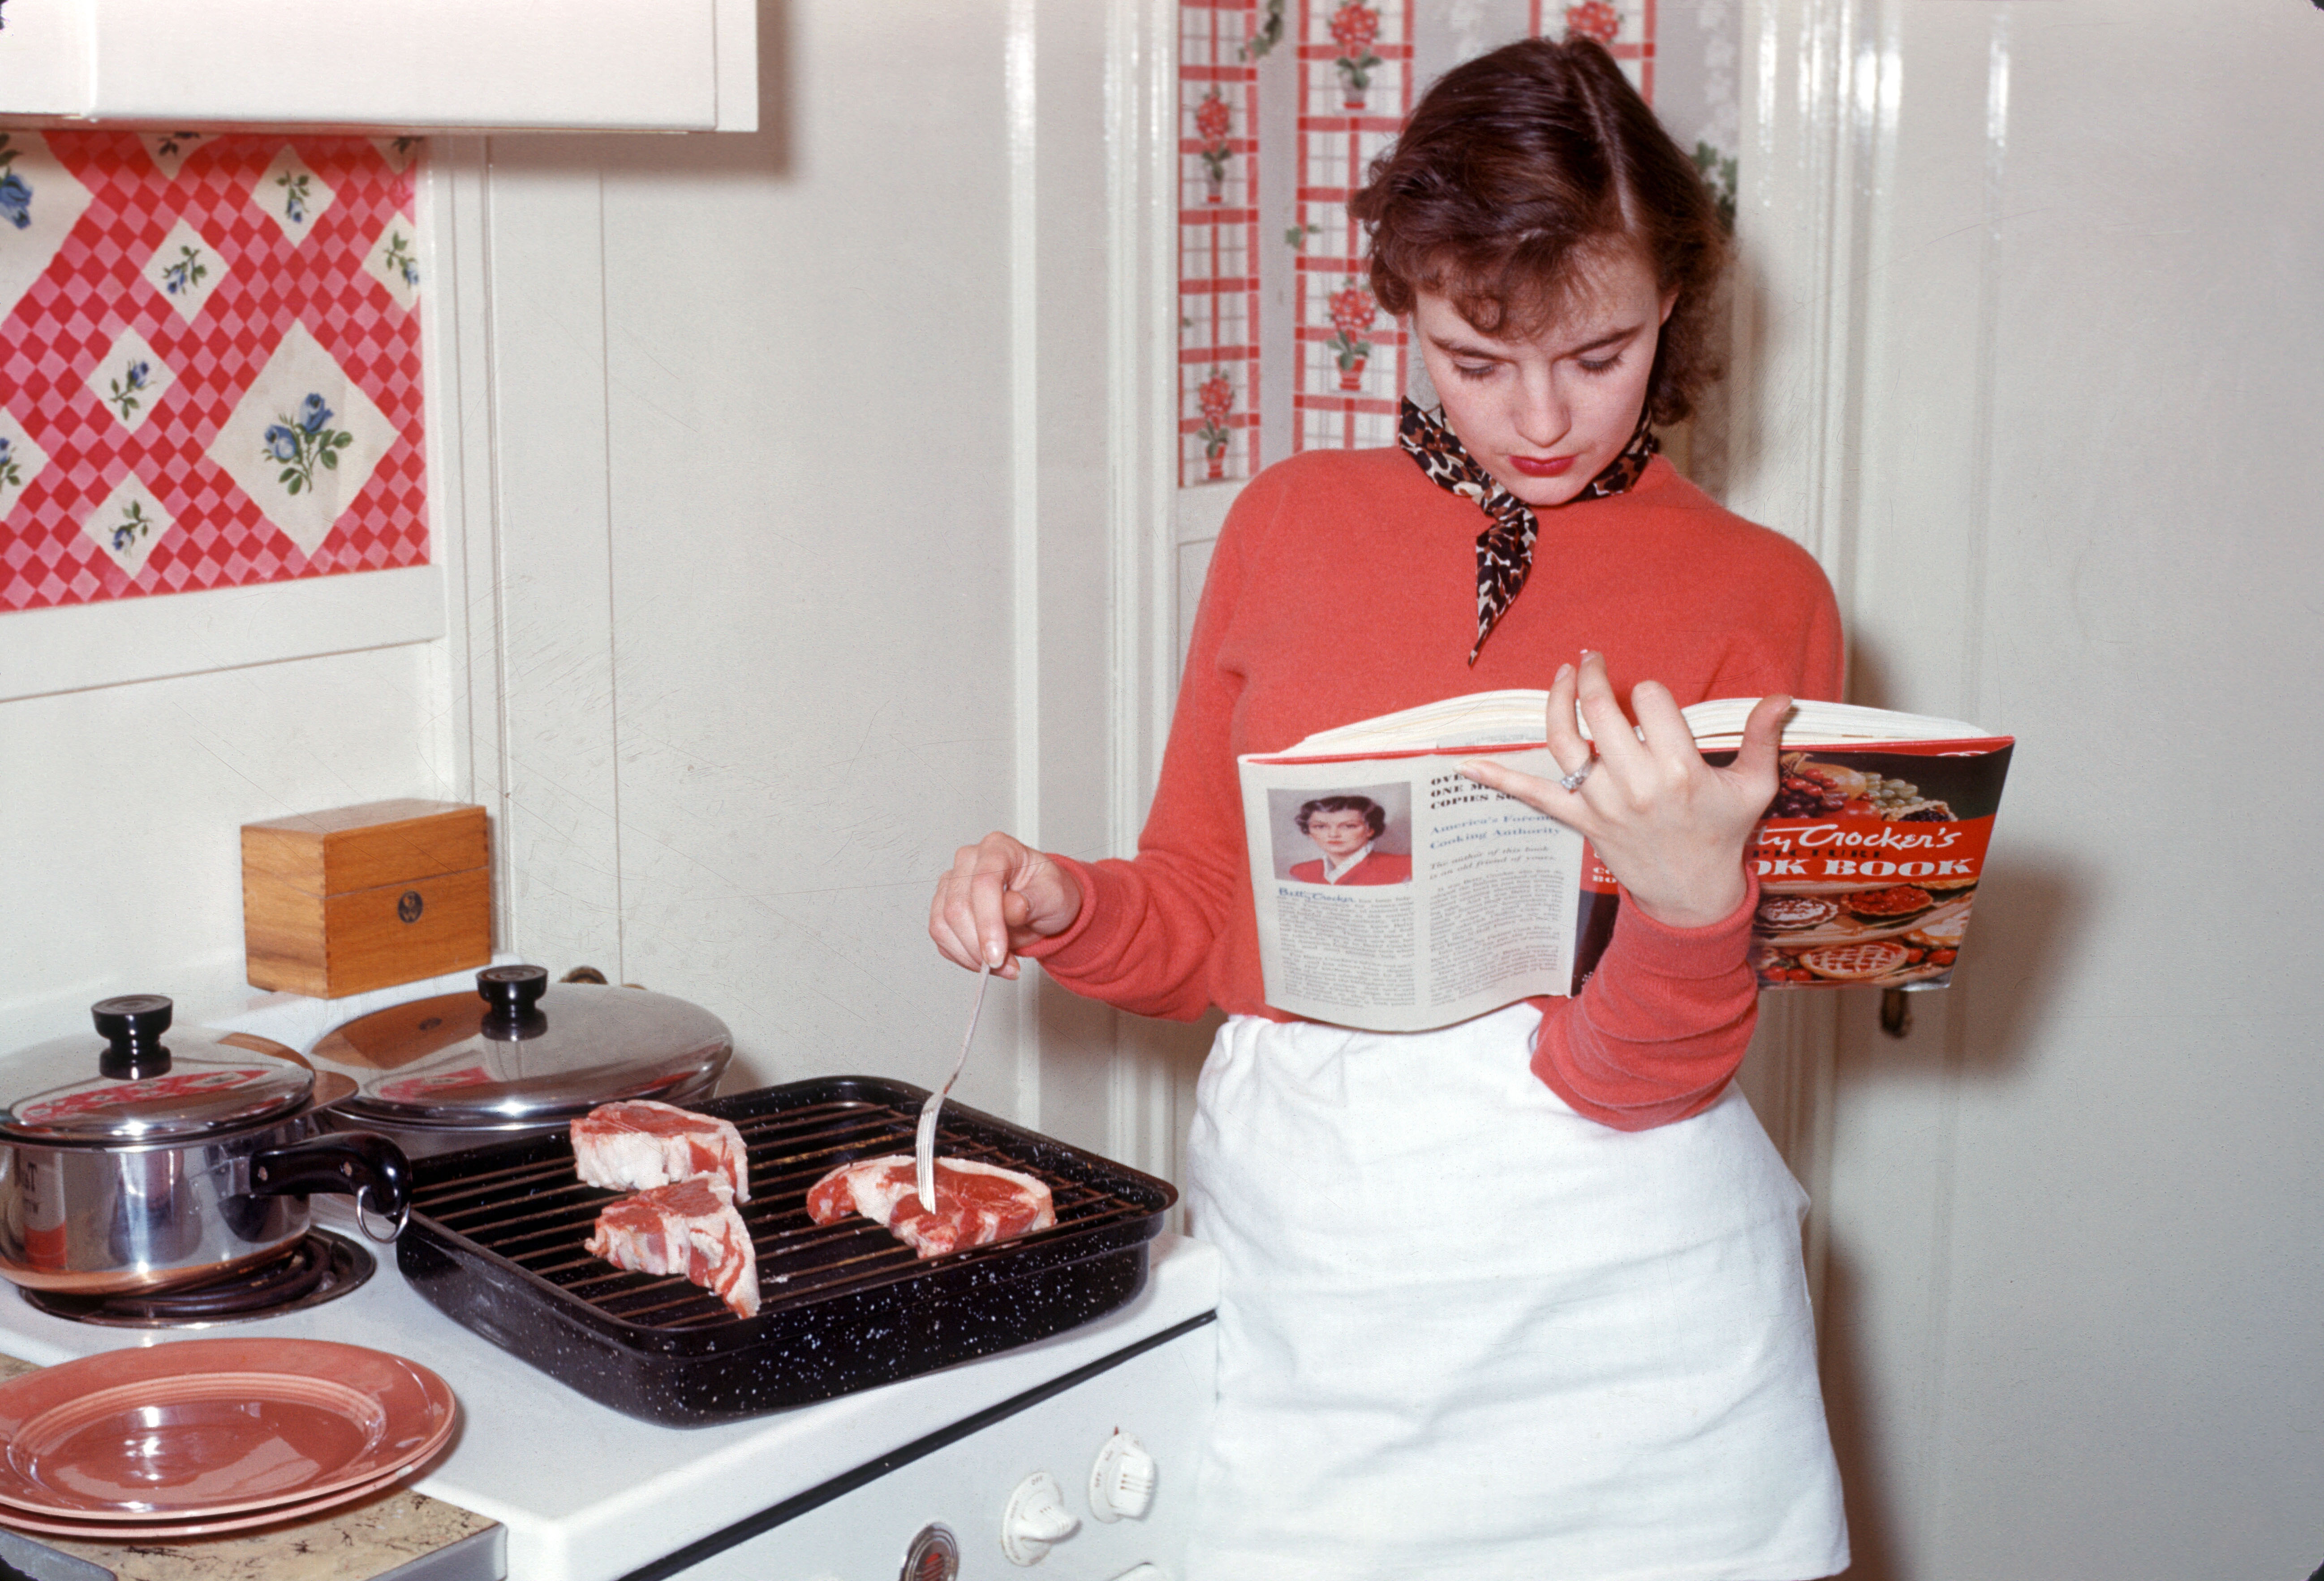 A vintage photo of a woman stirring a pot while reading a cookbook